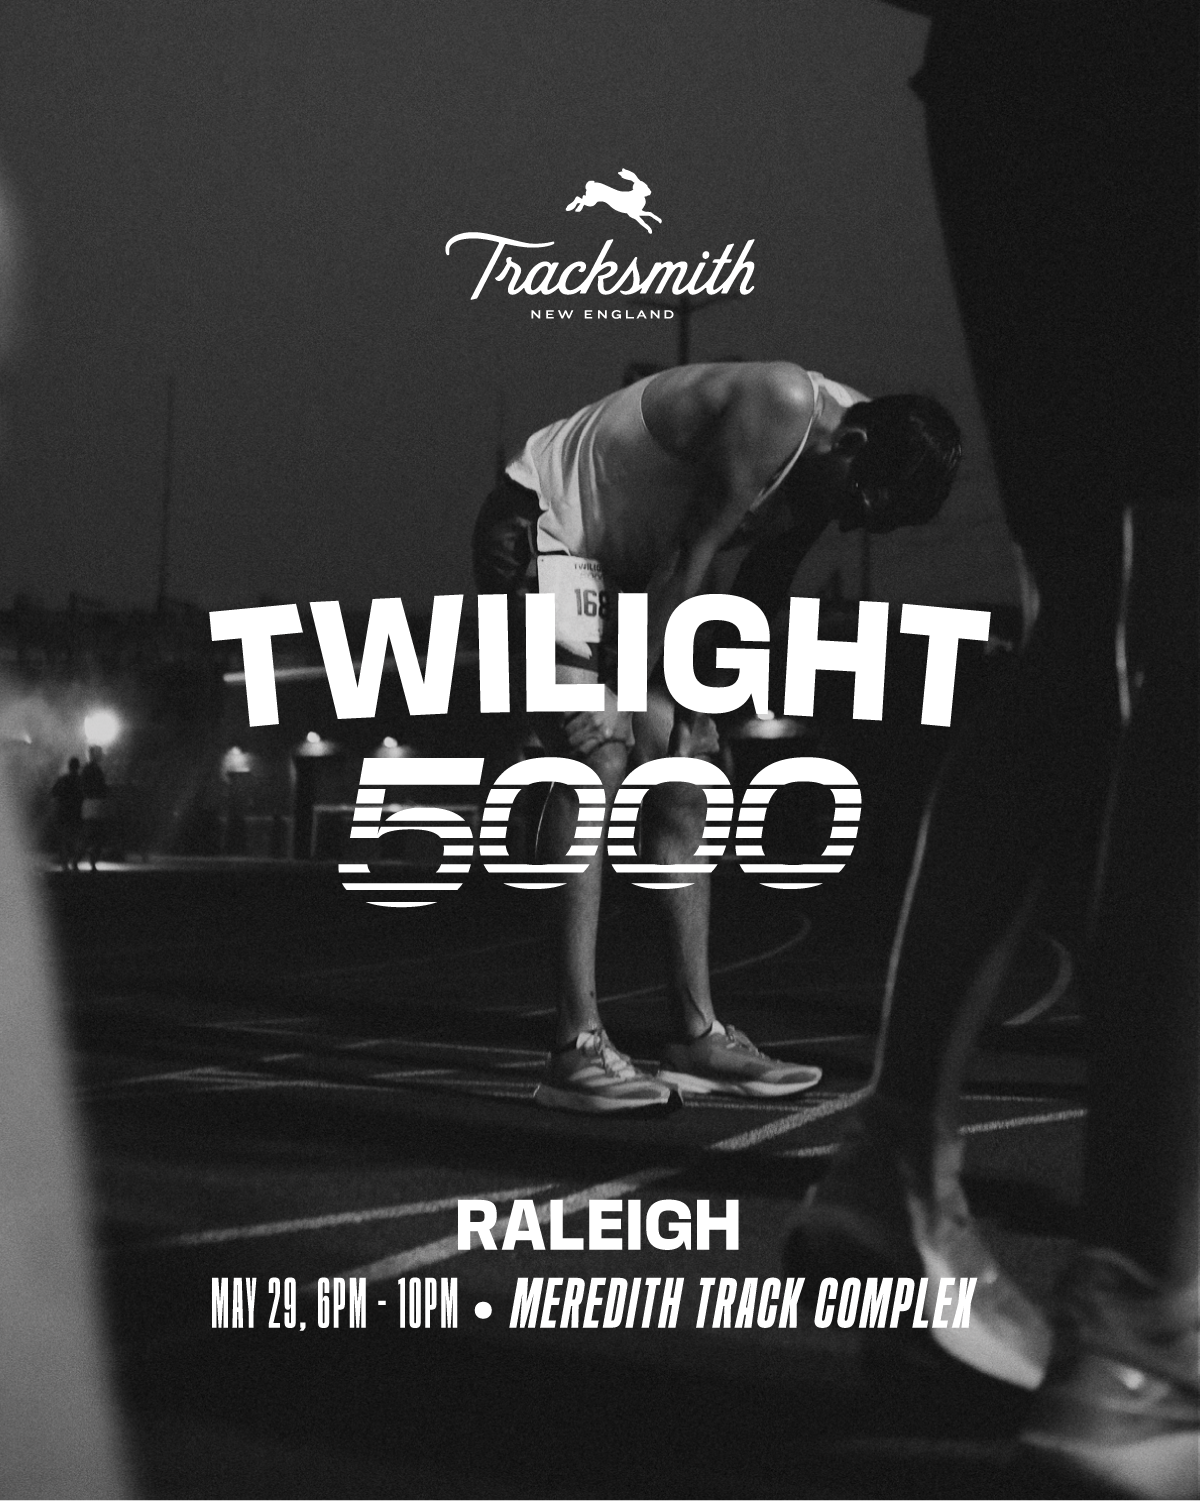 Twilight 5000m poster with runner doubled over 